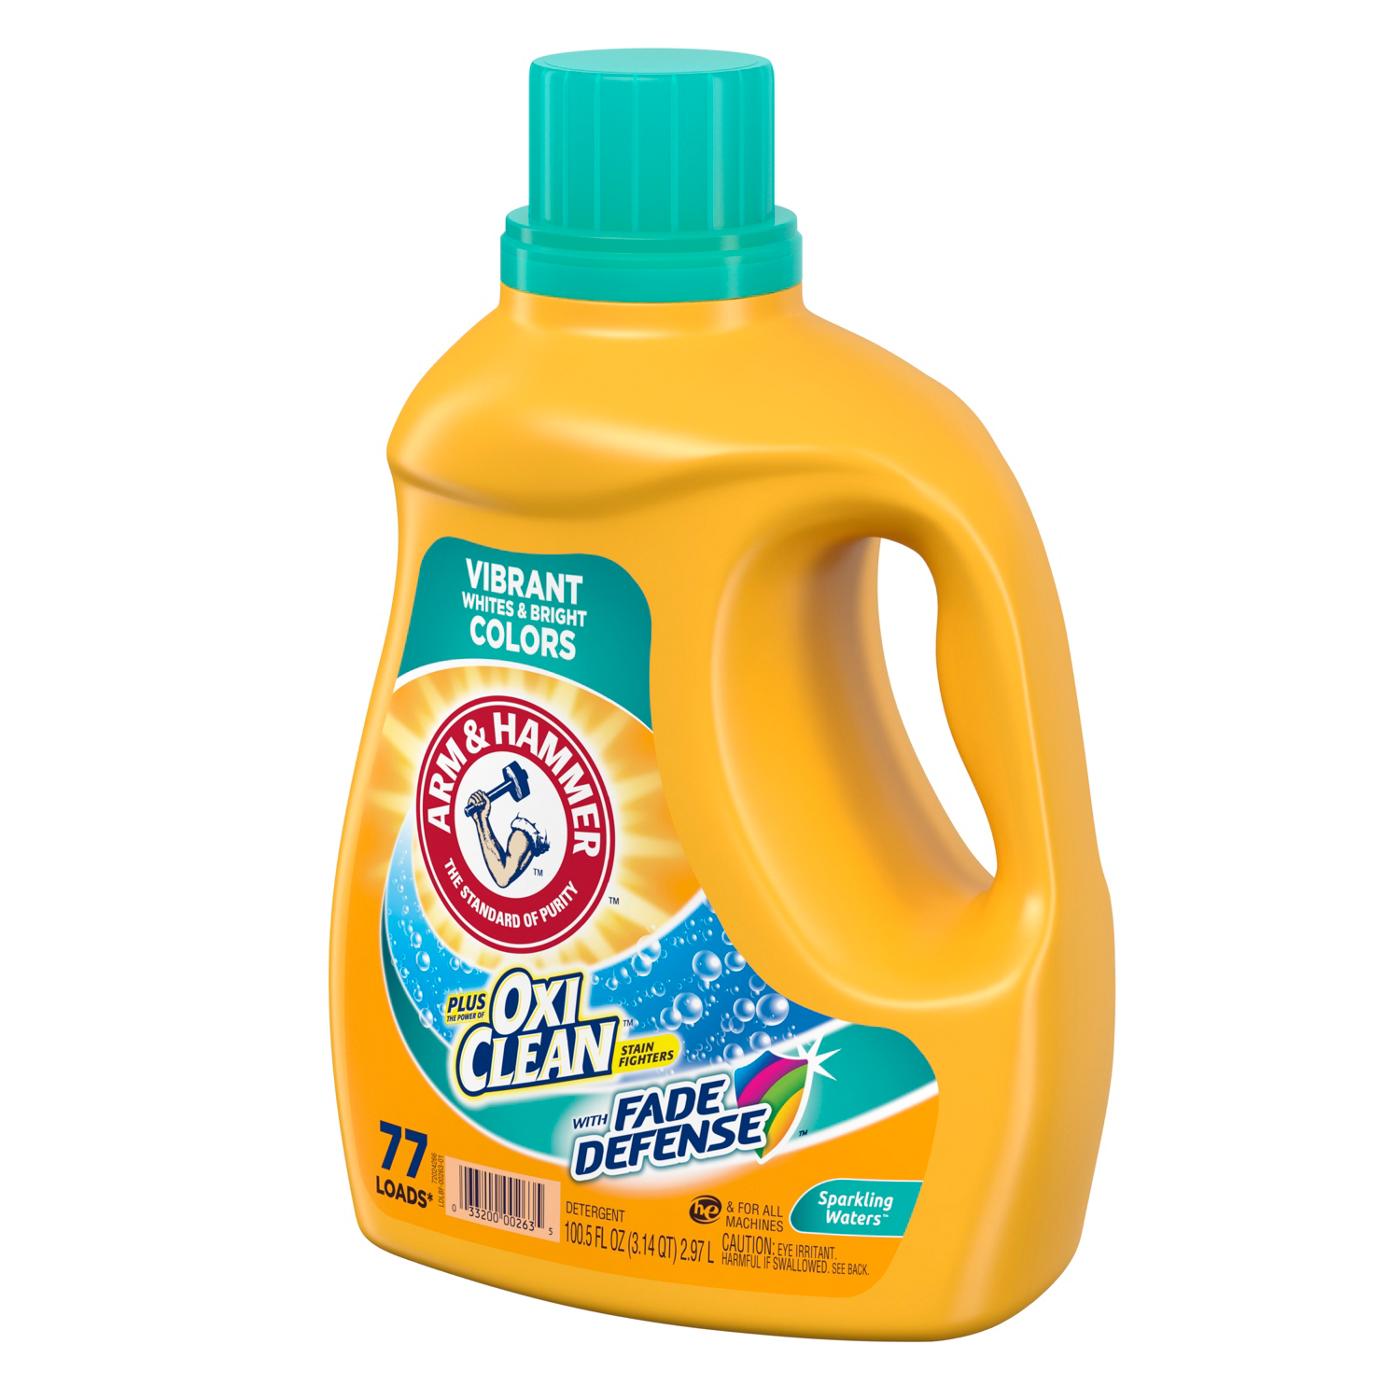 Arm & Hammer Plus OxiClean Sparkling Waters HE Liquid Laundry Detergent 77 Loads; image 3 of 3